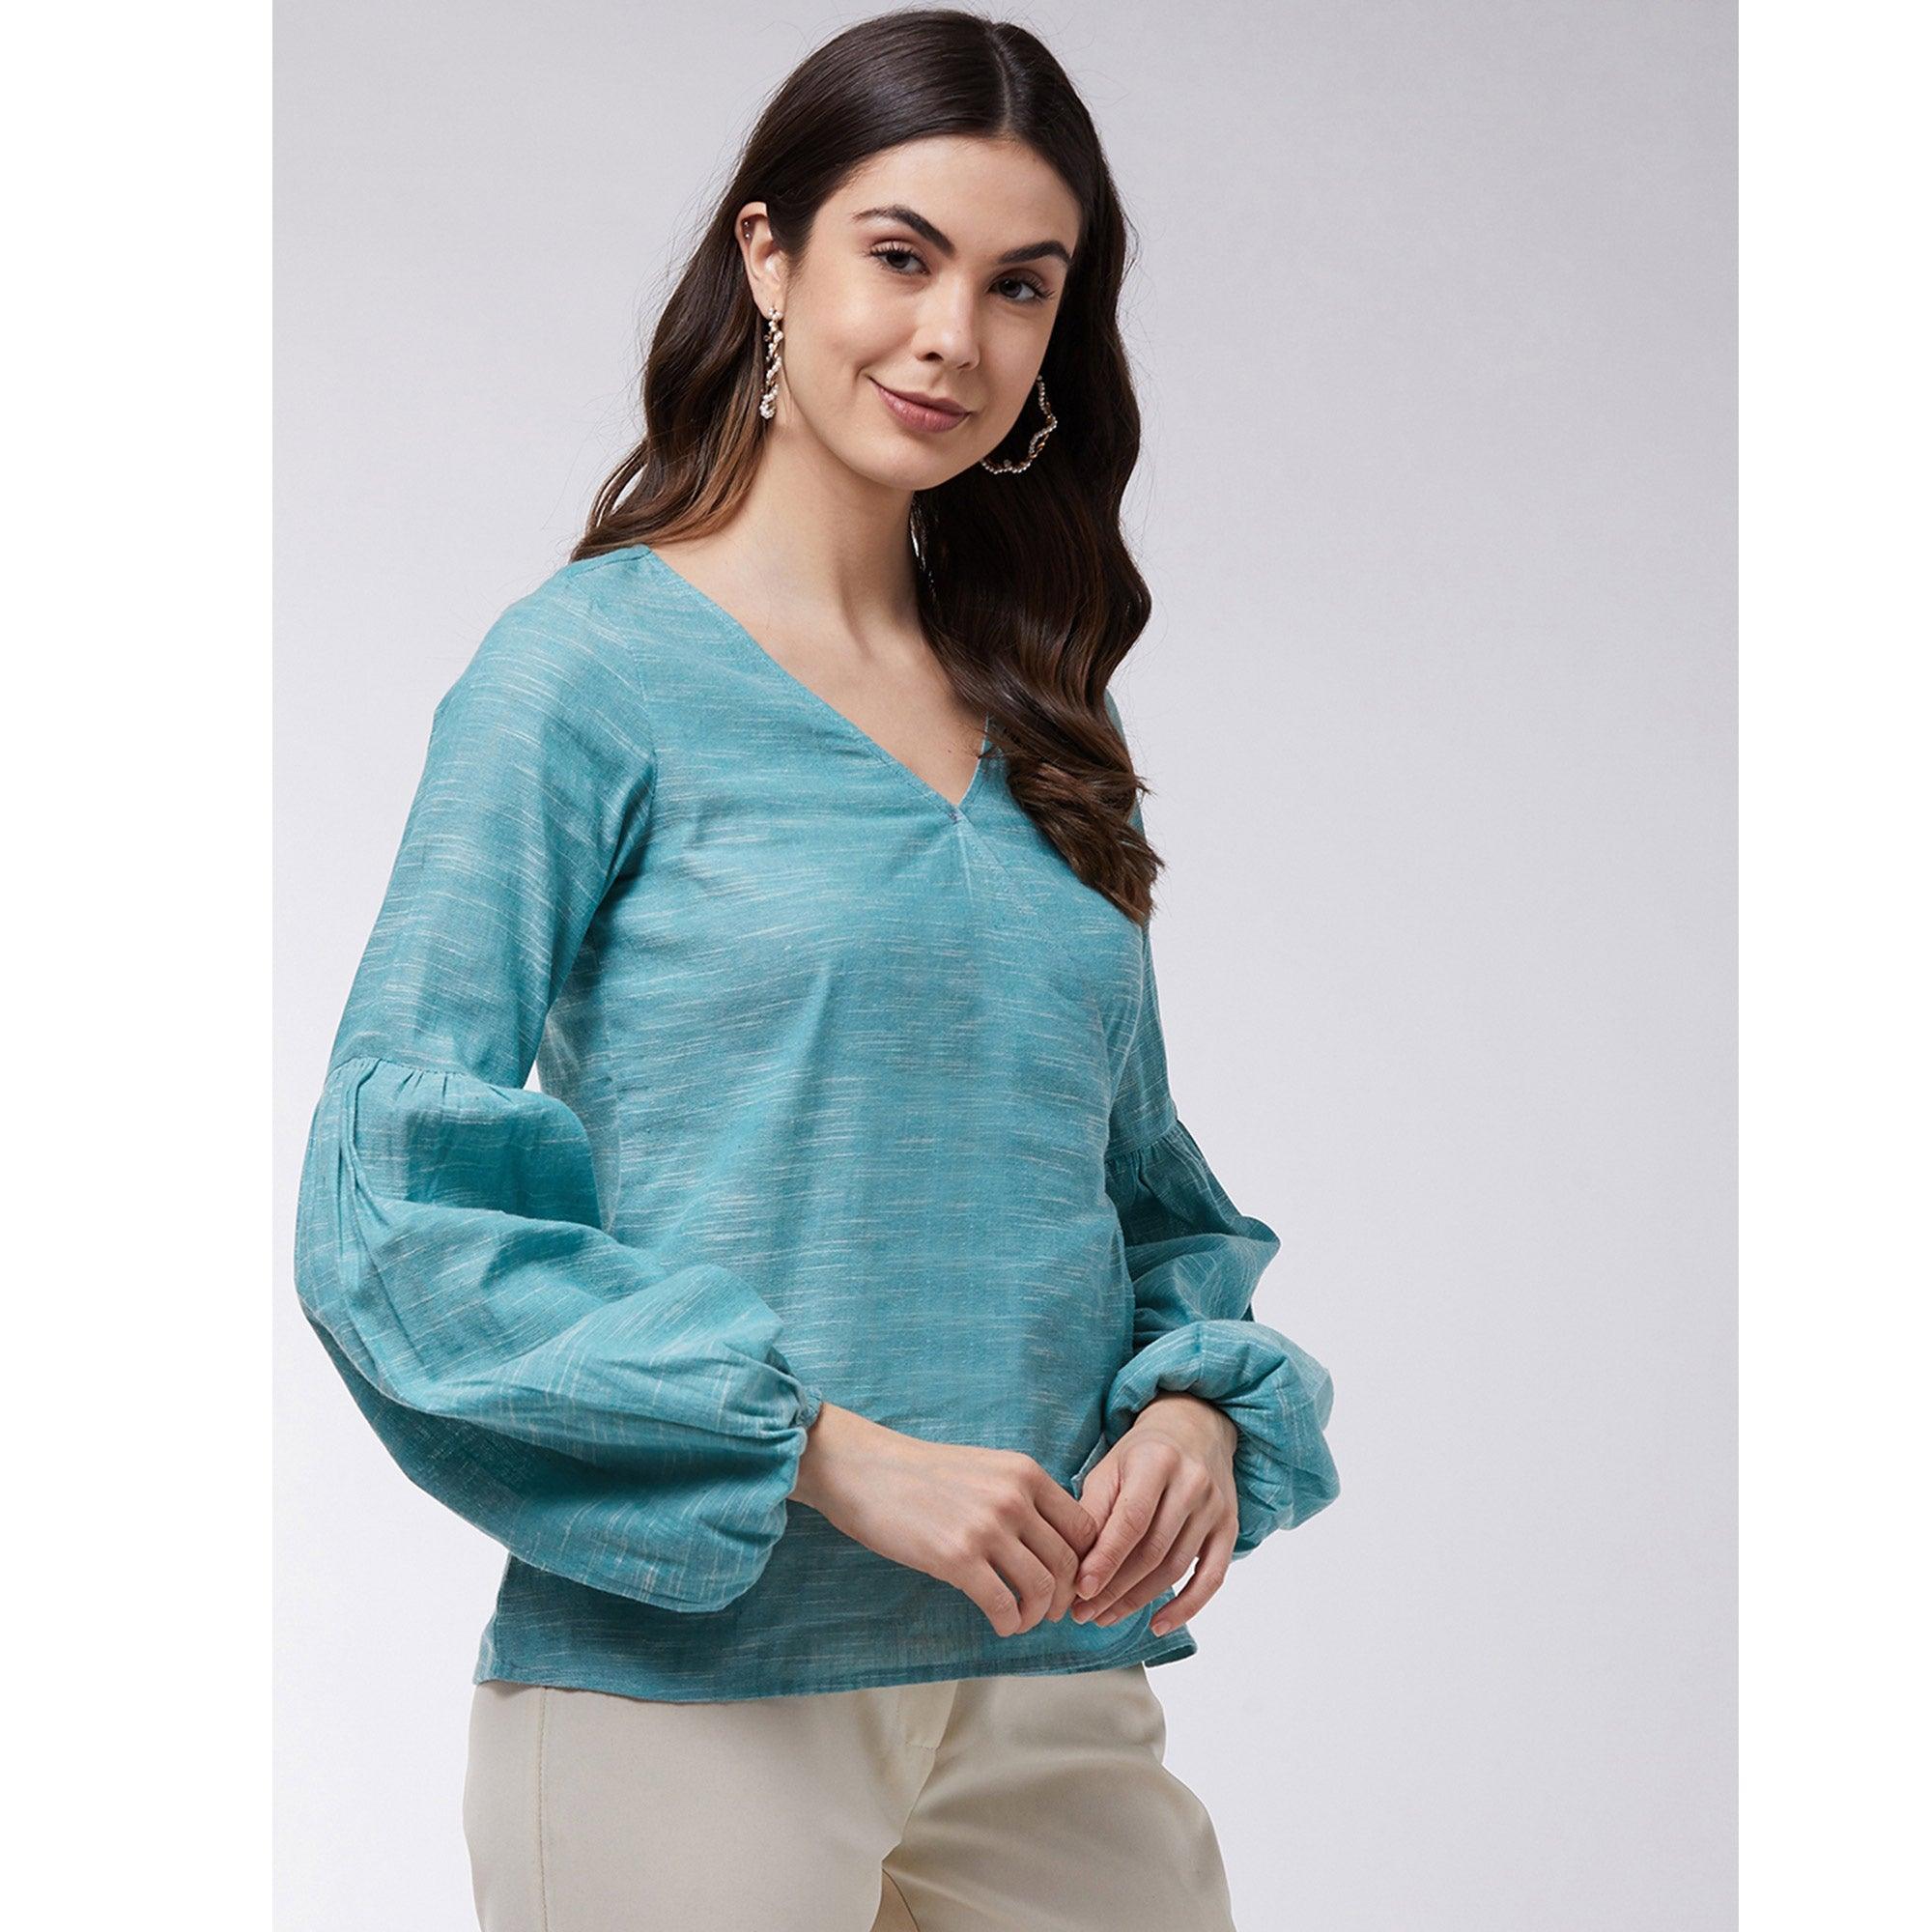 Pannkh - Women's Angarkha Style Extended Puff Sleeve Chambray Top - Peachmode